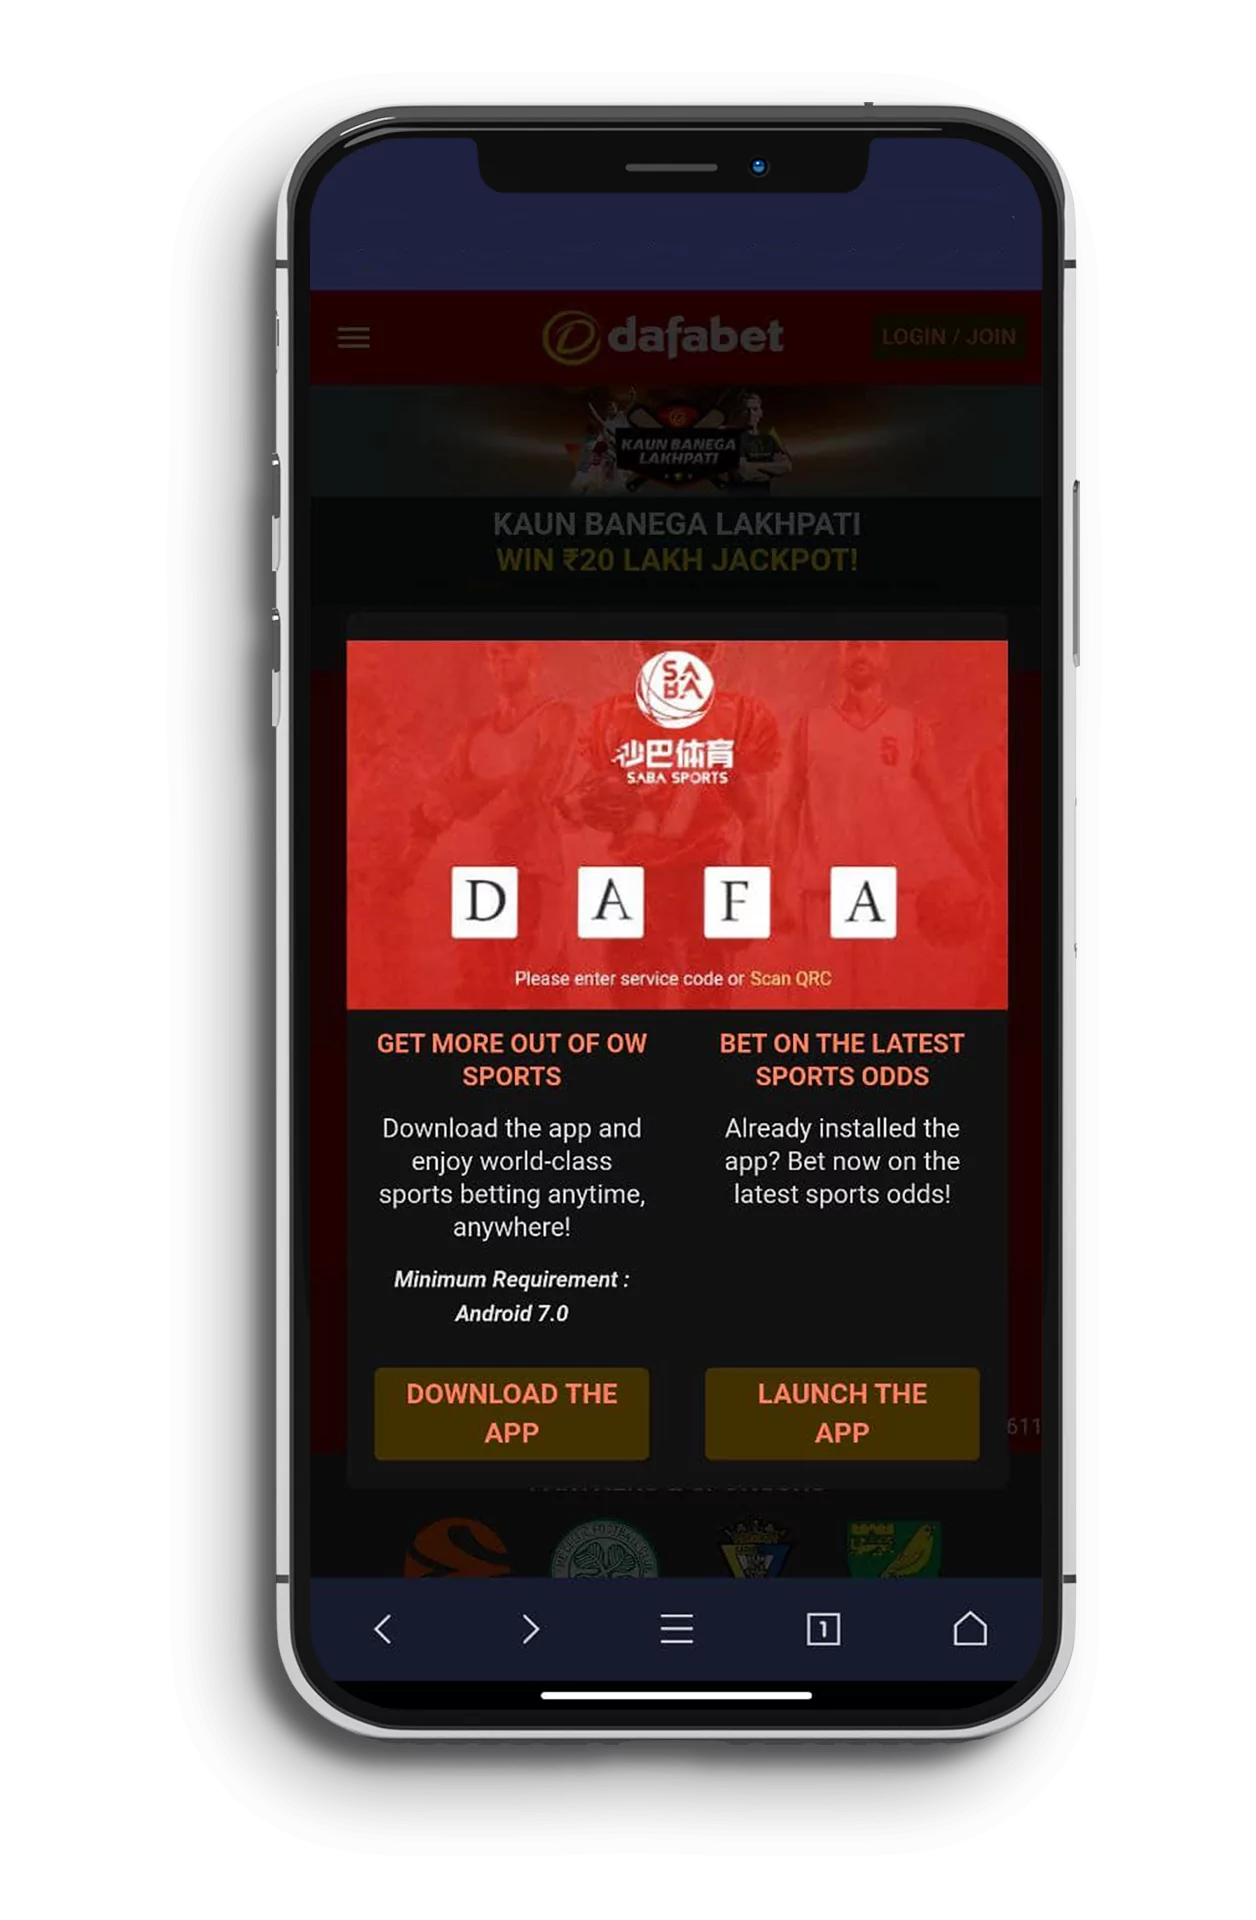 Step 3: Install Dafabet App on your device.